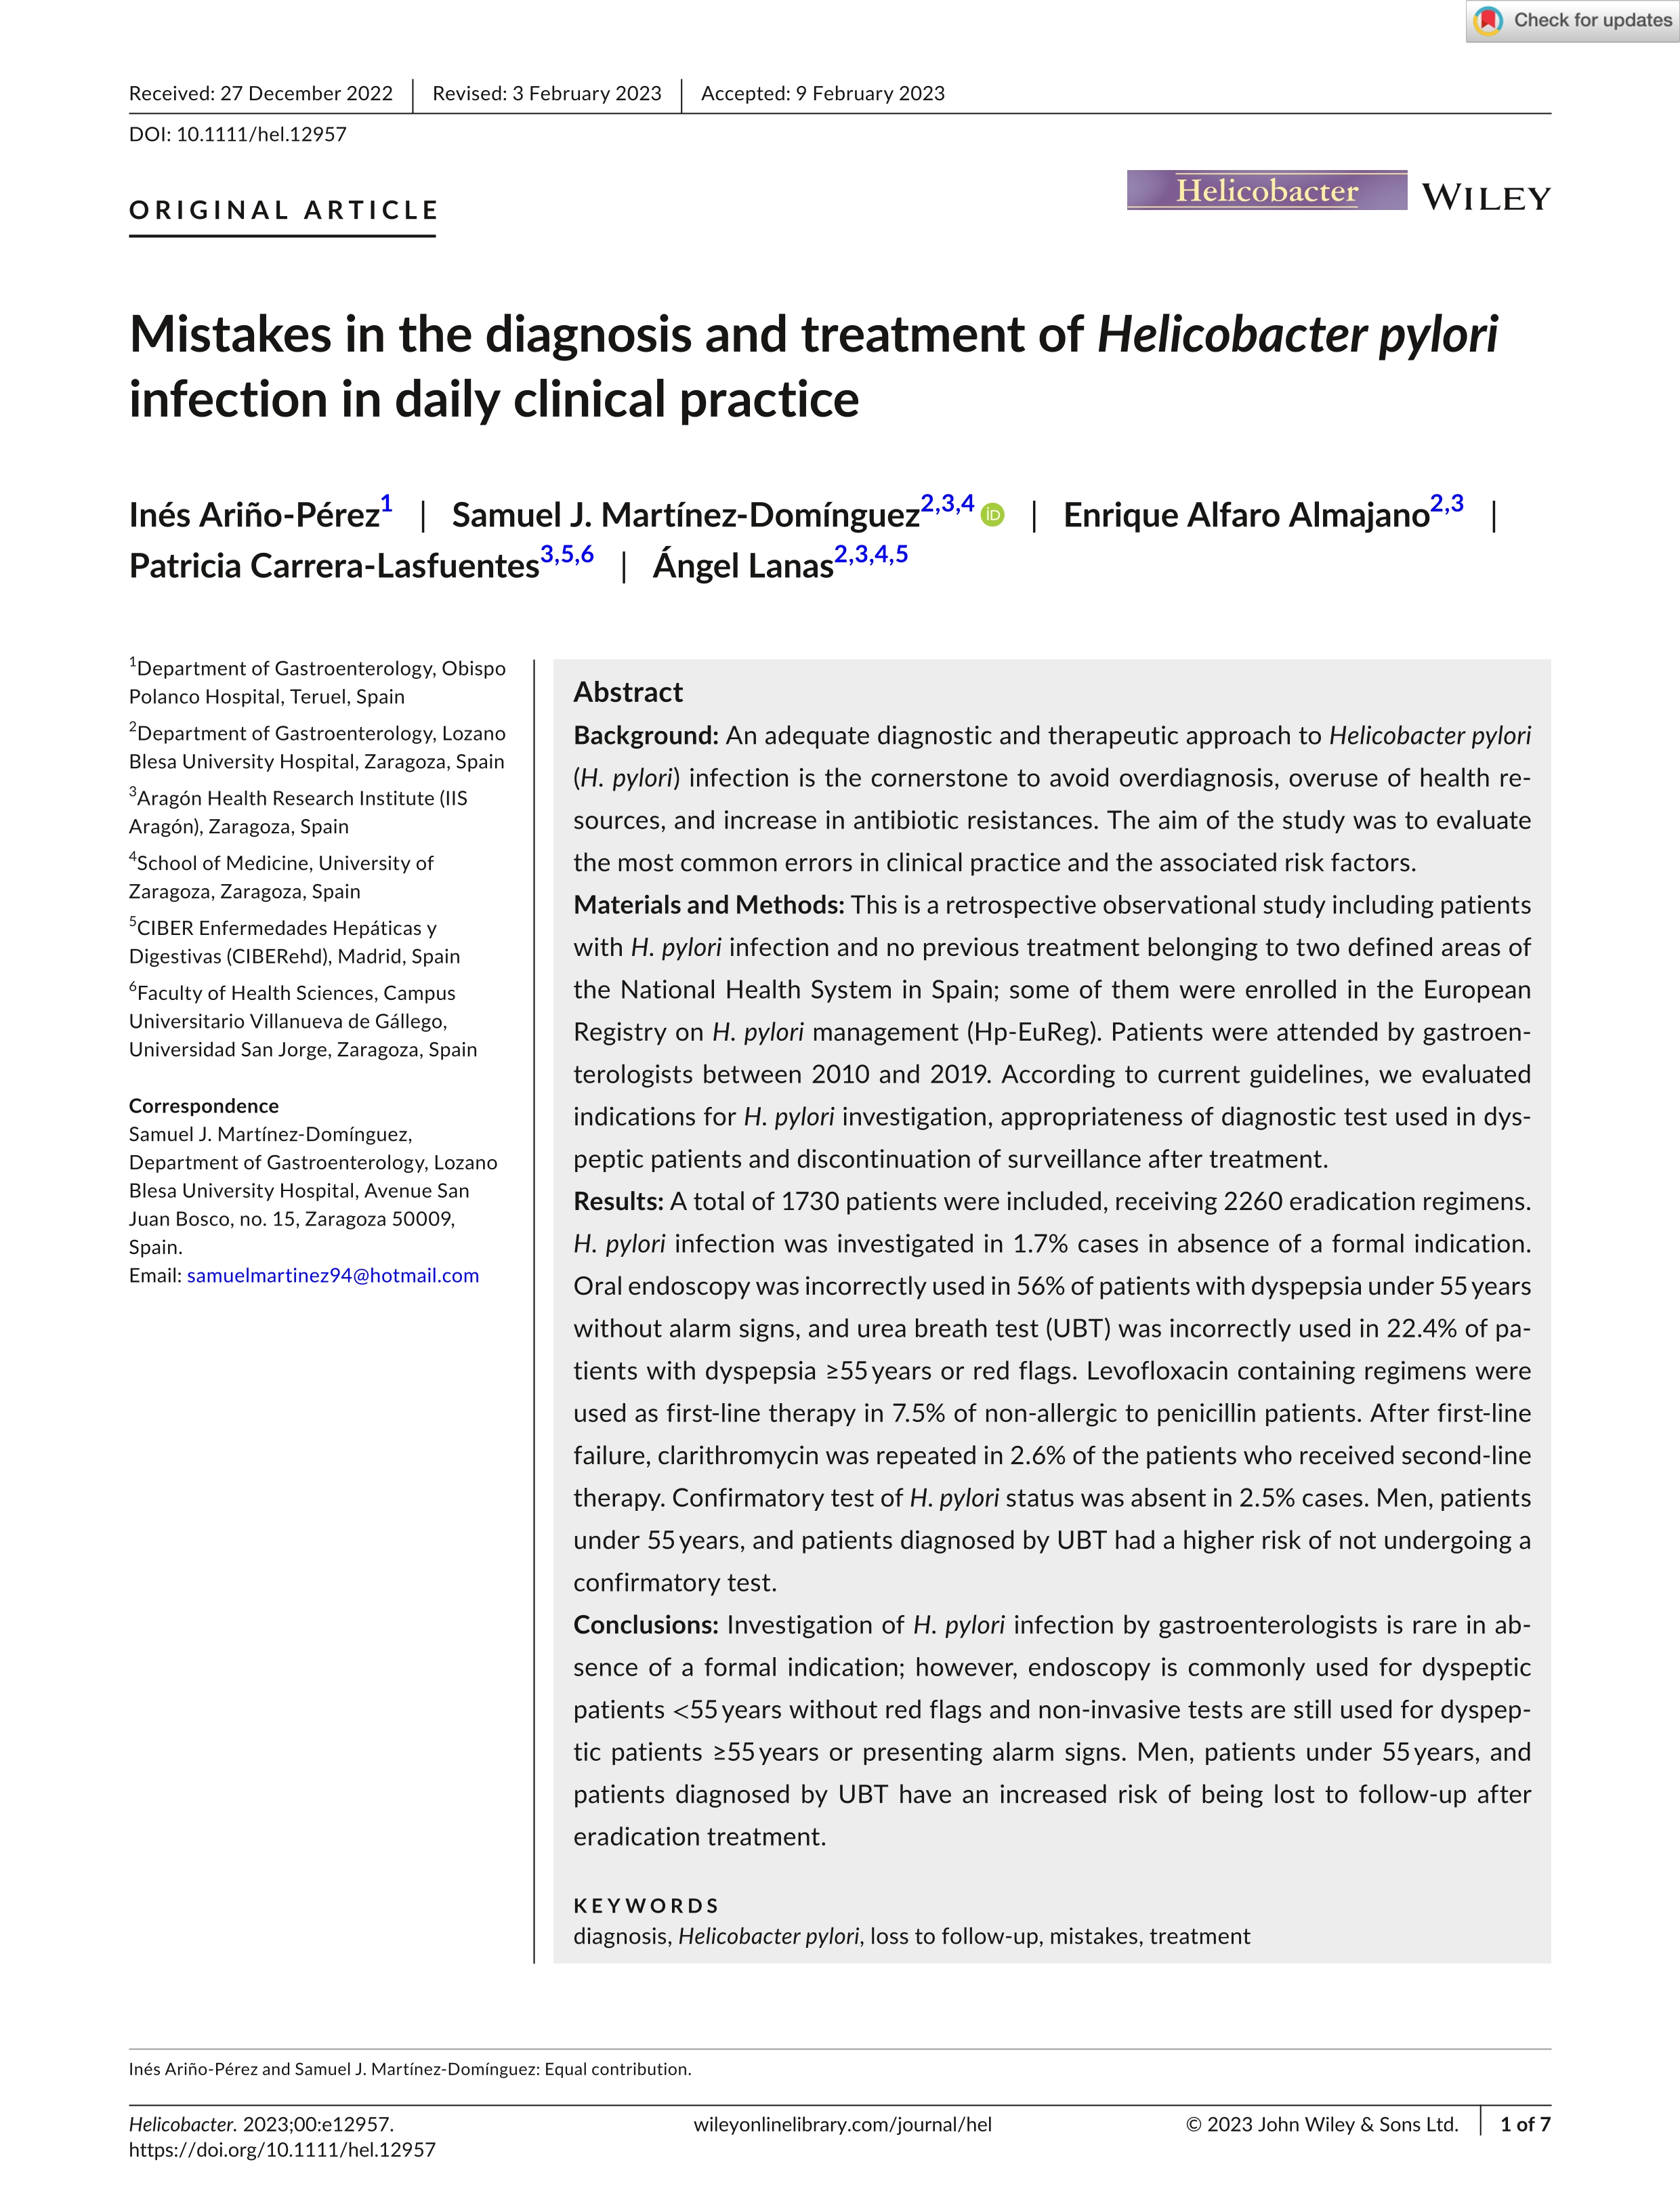 Mistakes in the diagnosis and treatment of Helicobacter pylori infection in daily clinical practice